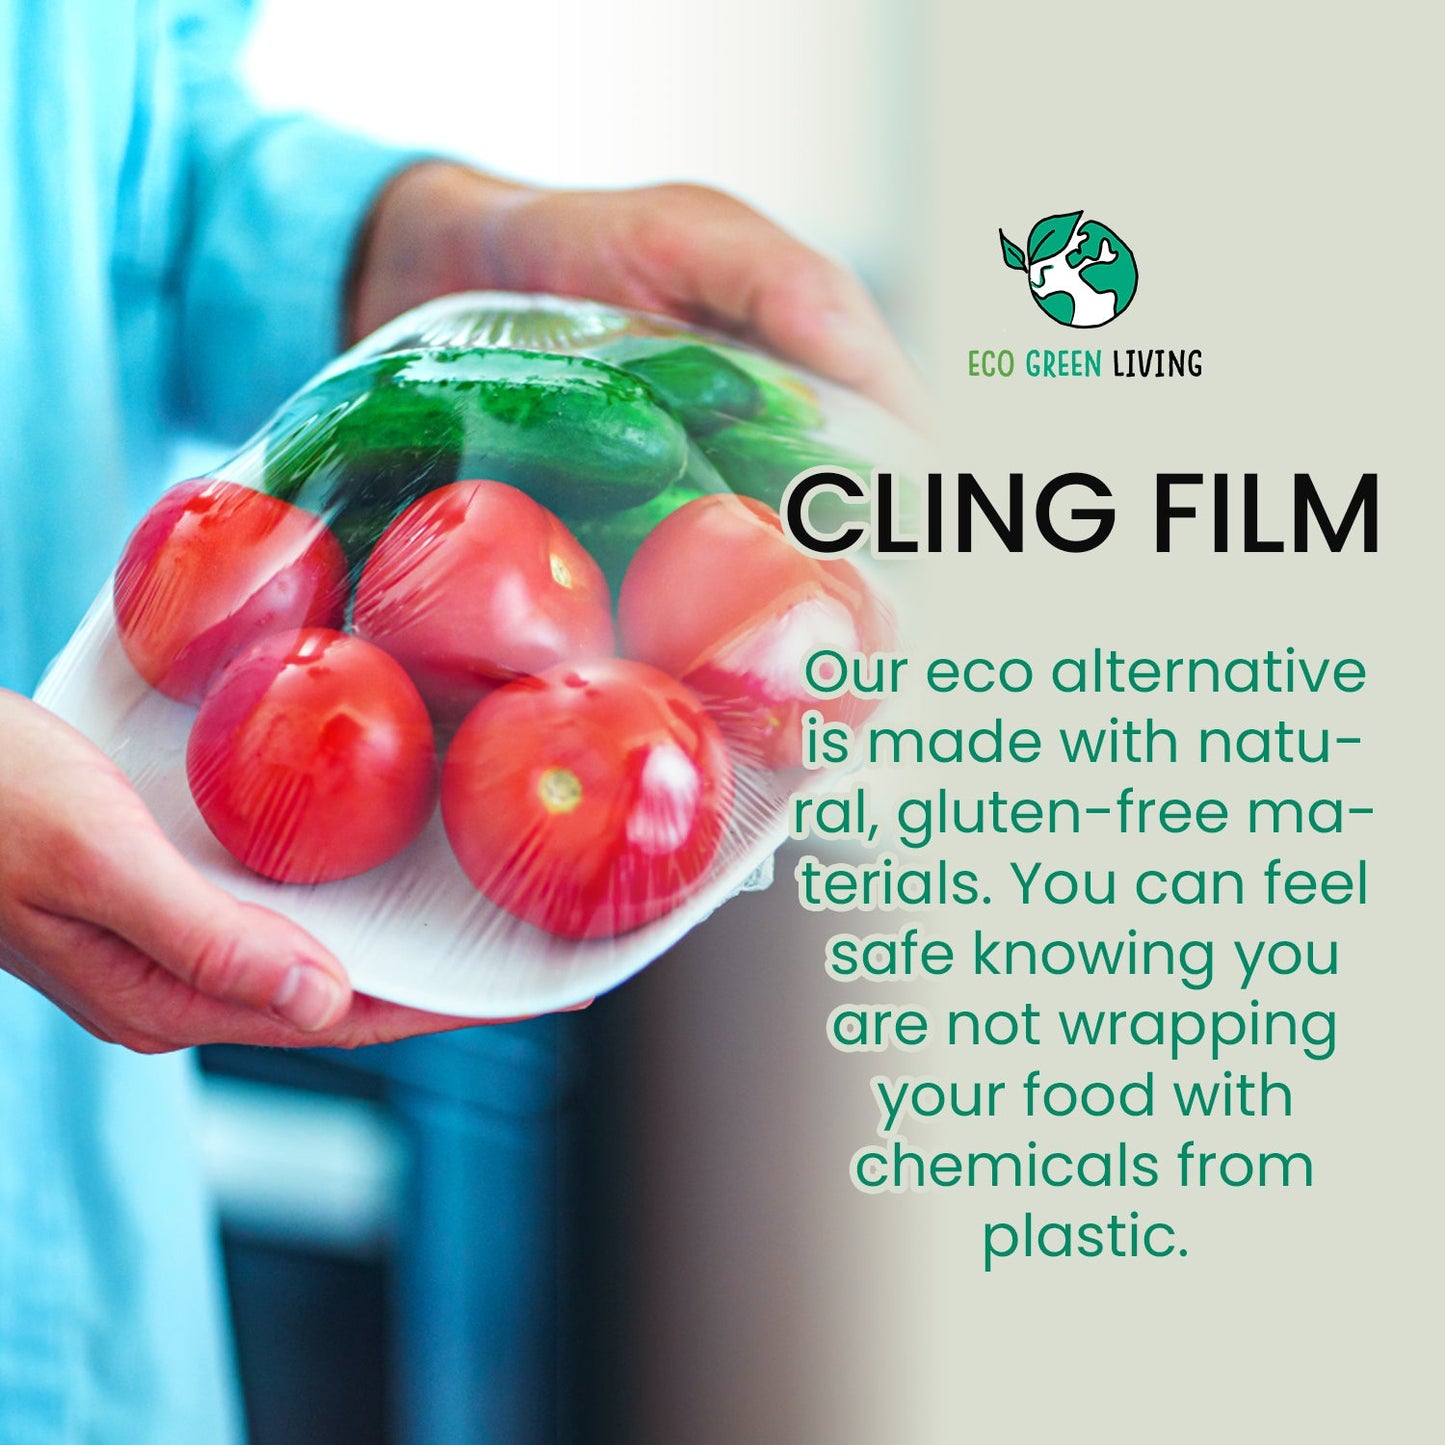 Compostable Cling Film Without The Plastic - Recycled Packaging - 4 x rolls 30cm x 30m - EcoGreenLiving